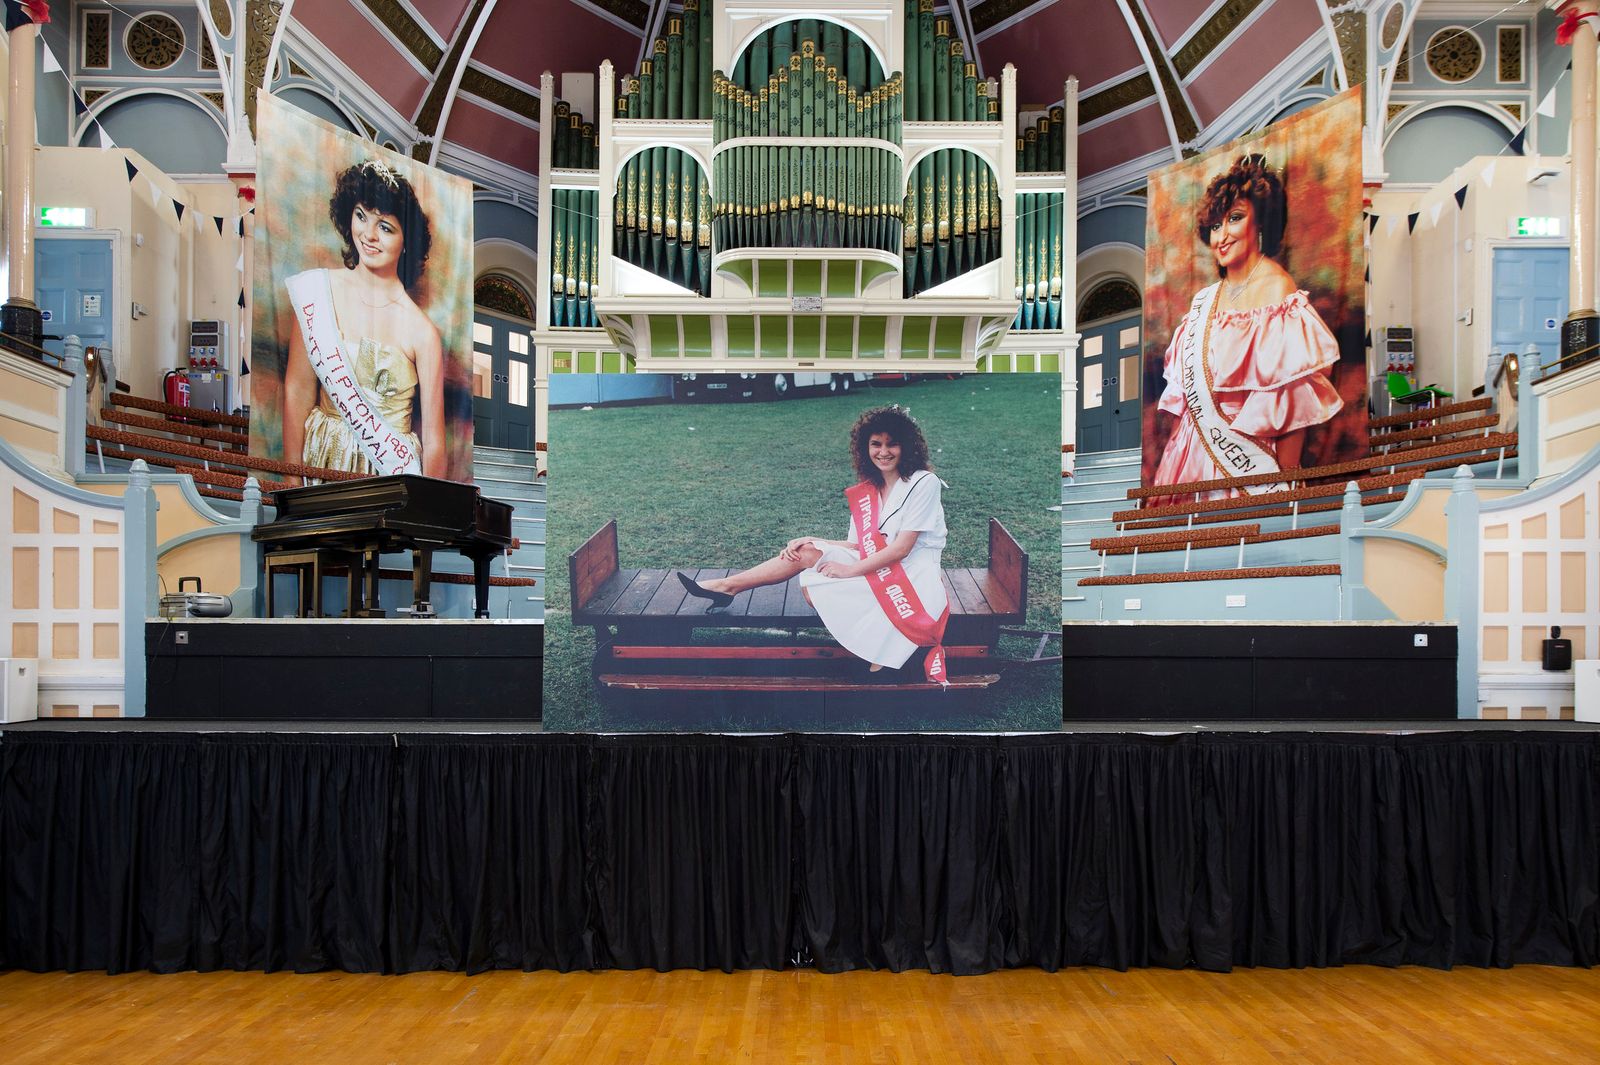 Installation view from the exhibition Carnival Queens © Erik Kessels